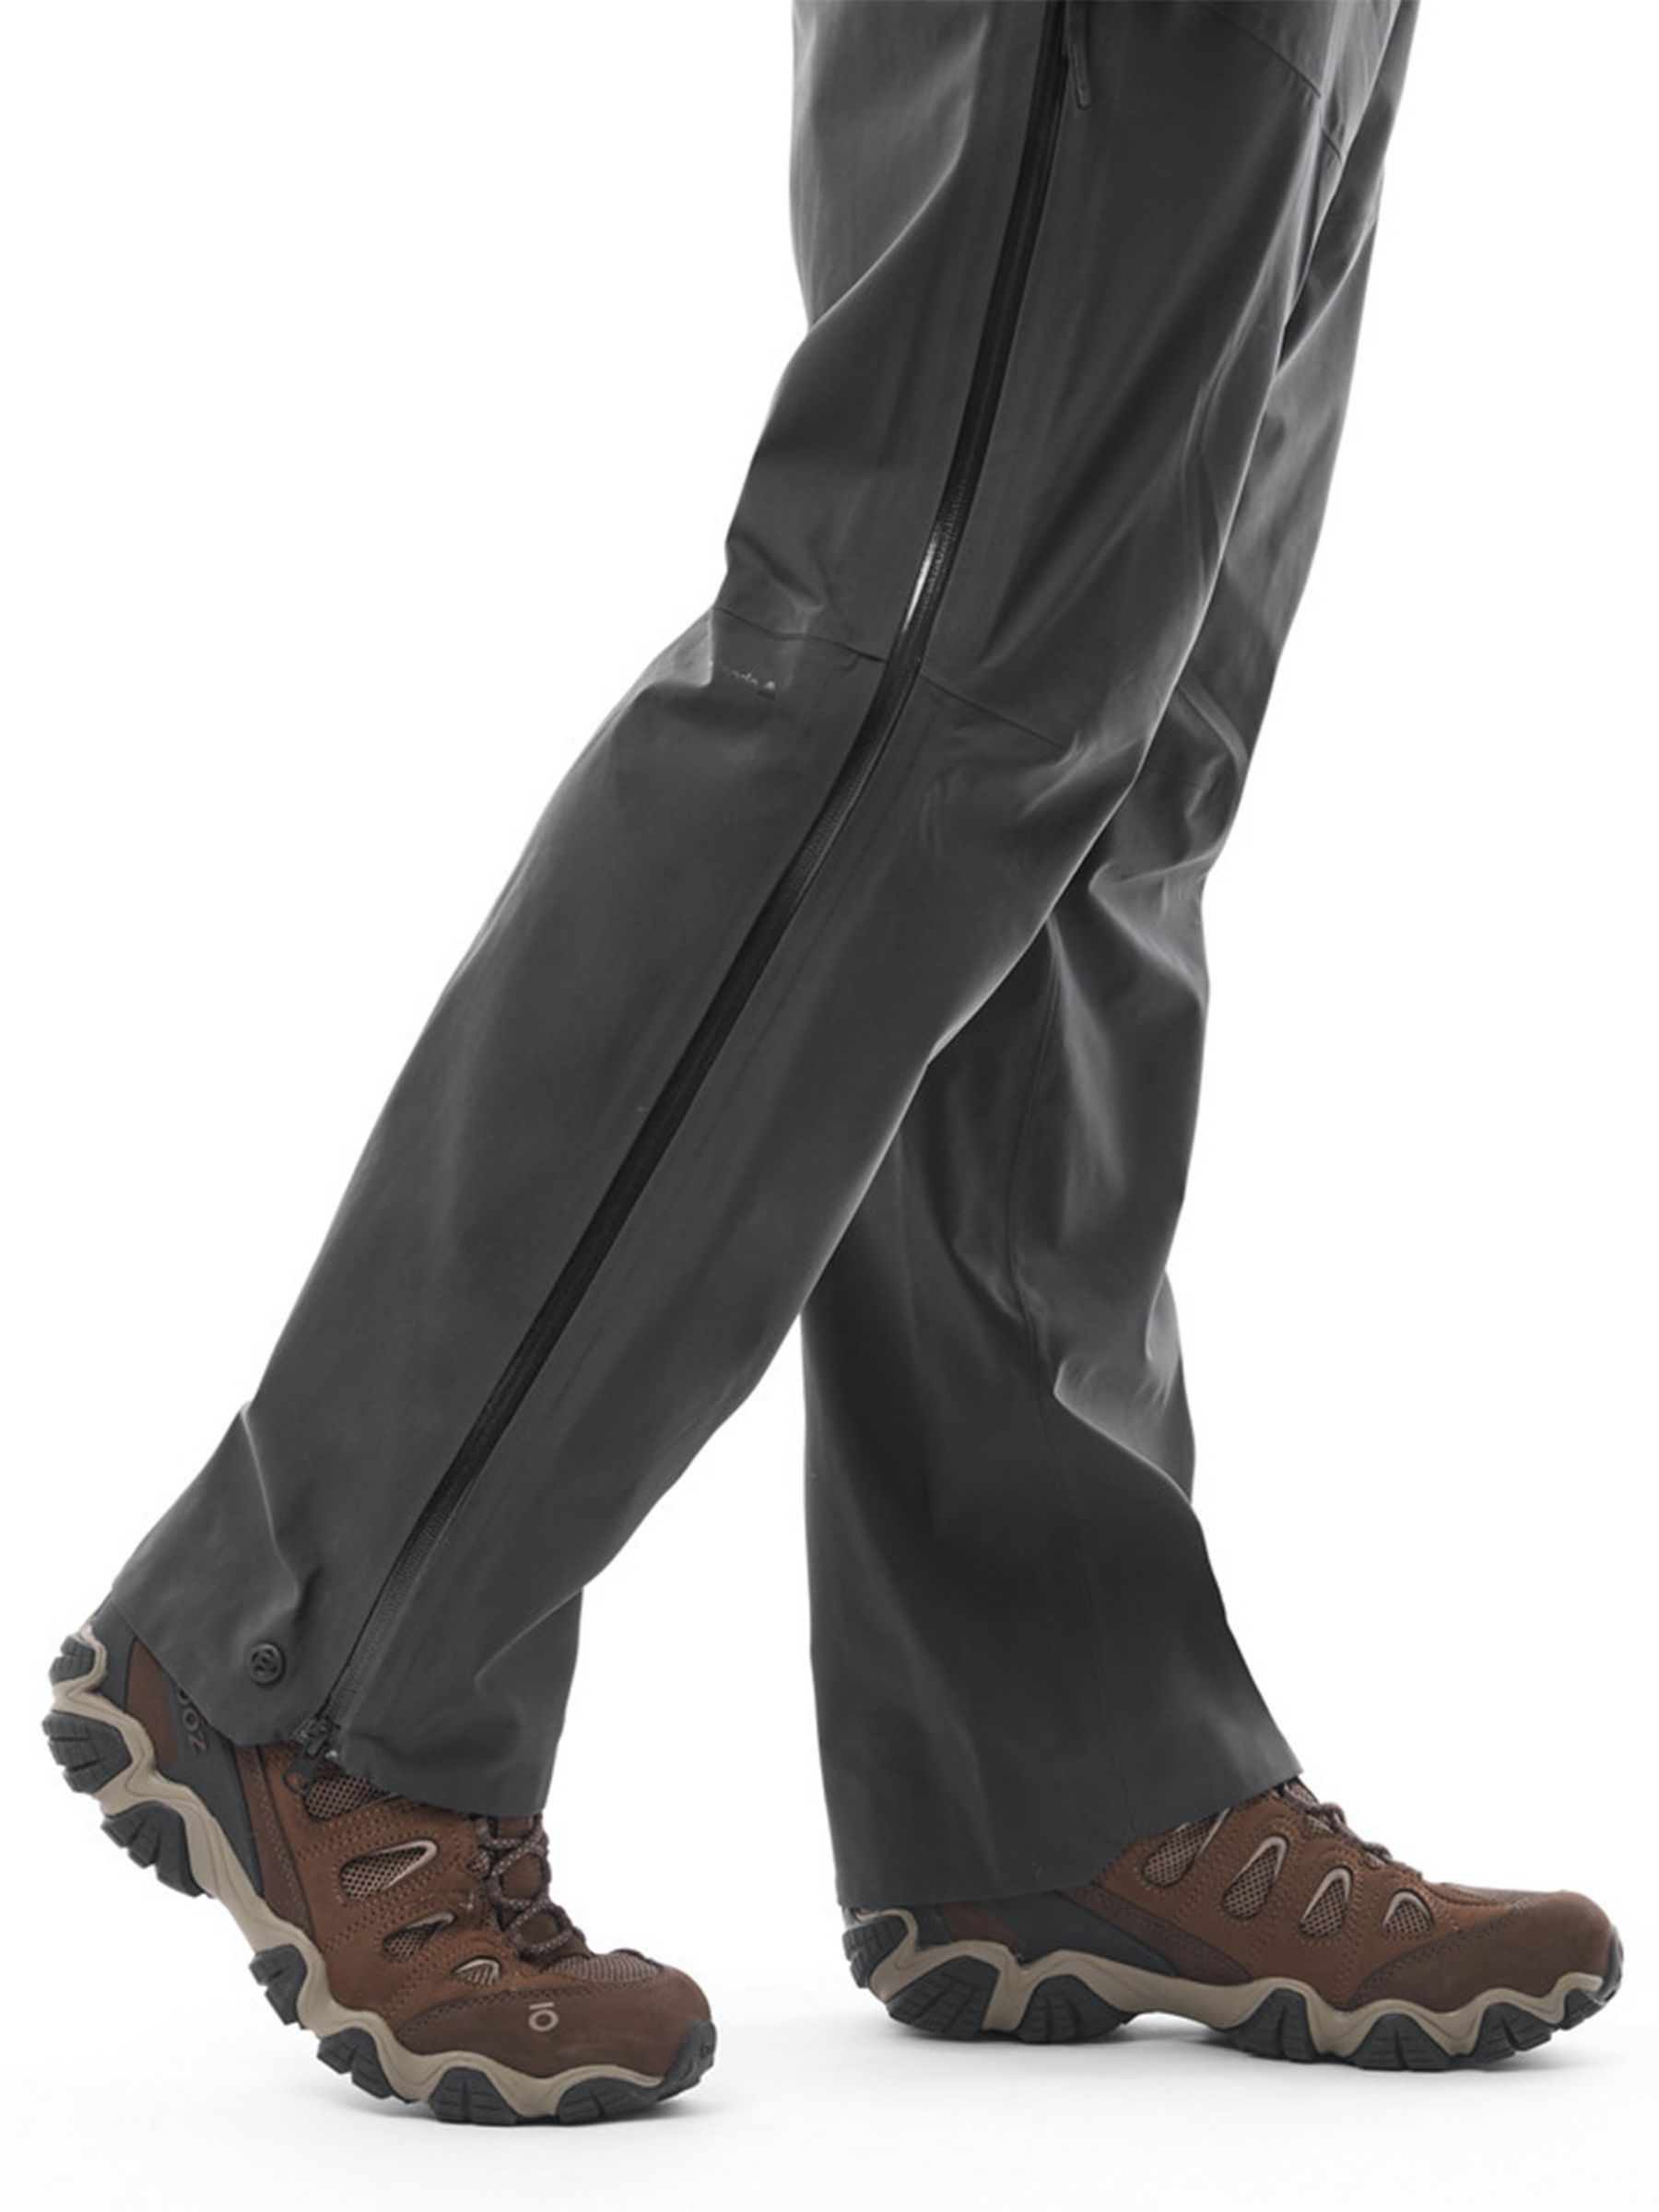 Rohan Ventus Waterproof Overtrousers, Carbon, S